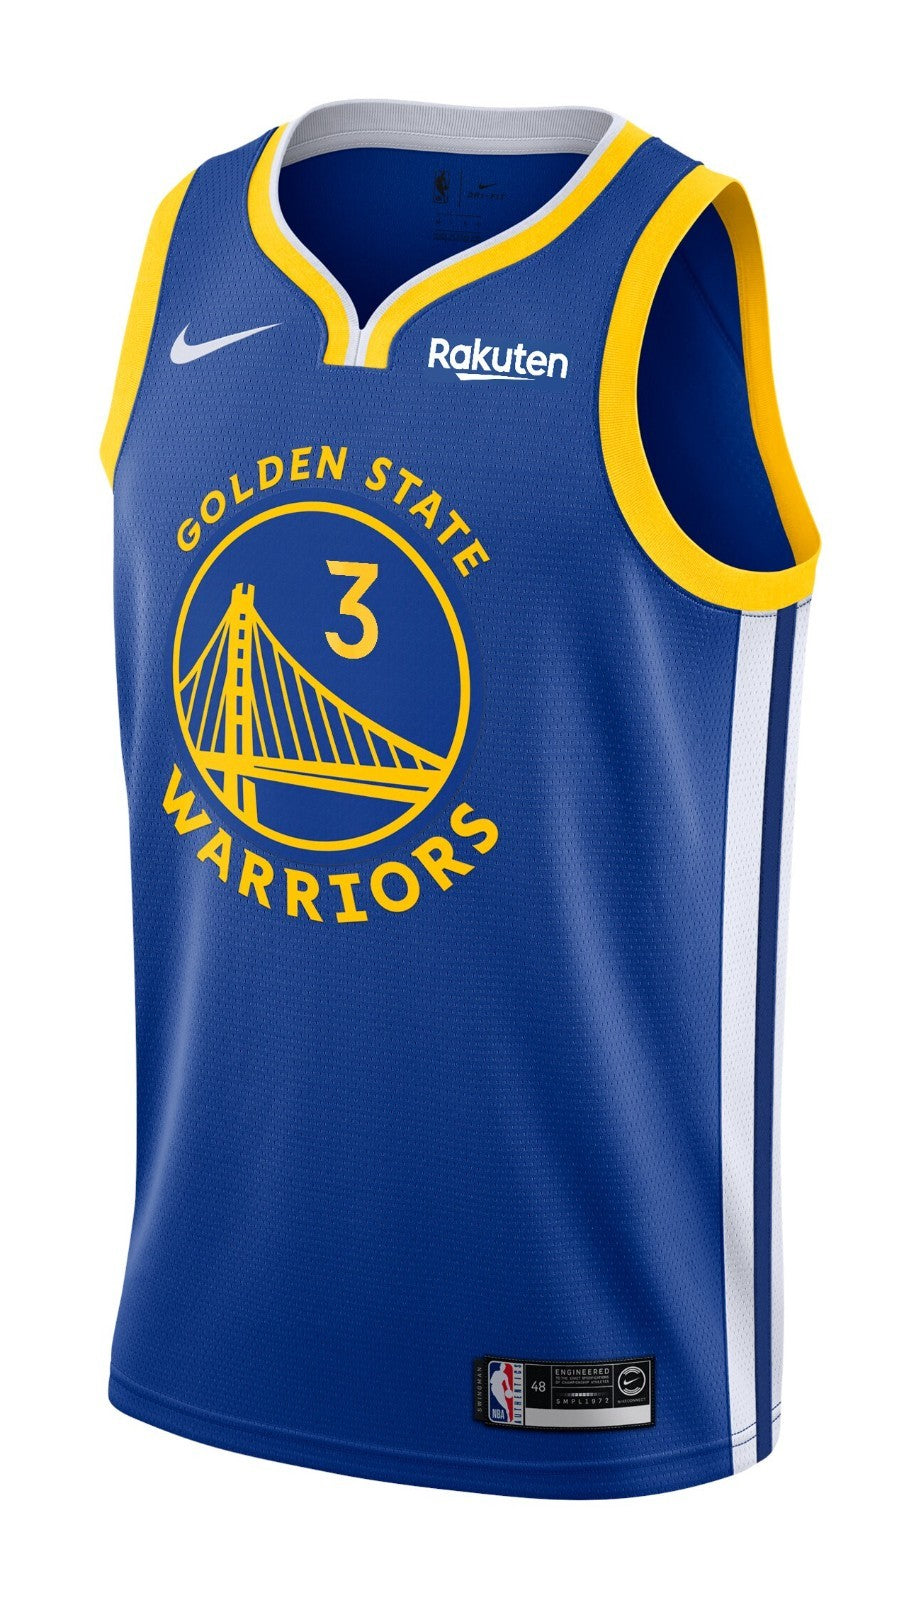 GOLDEN STATE WARRIORS ICON JERSEY 23/24